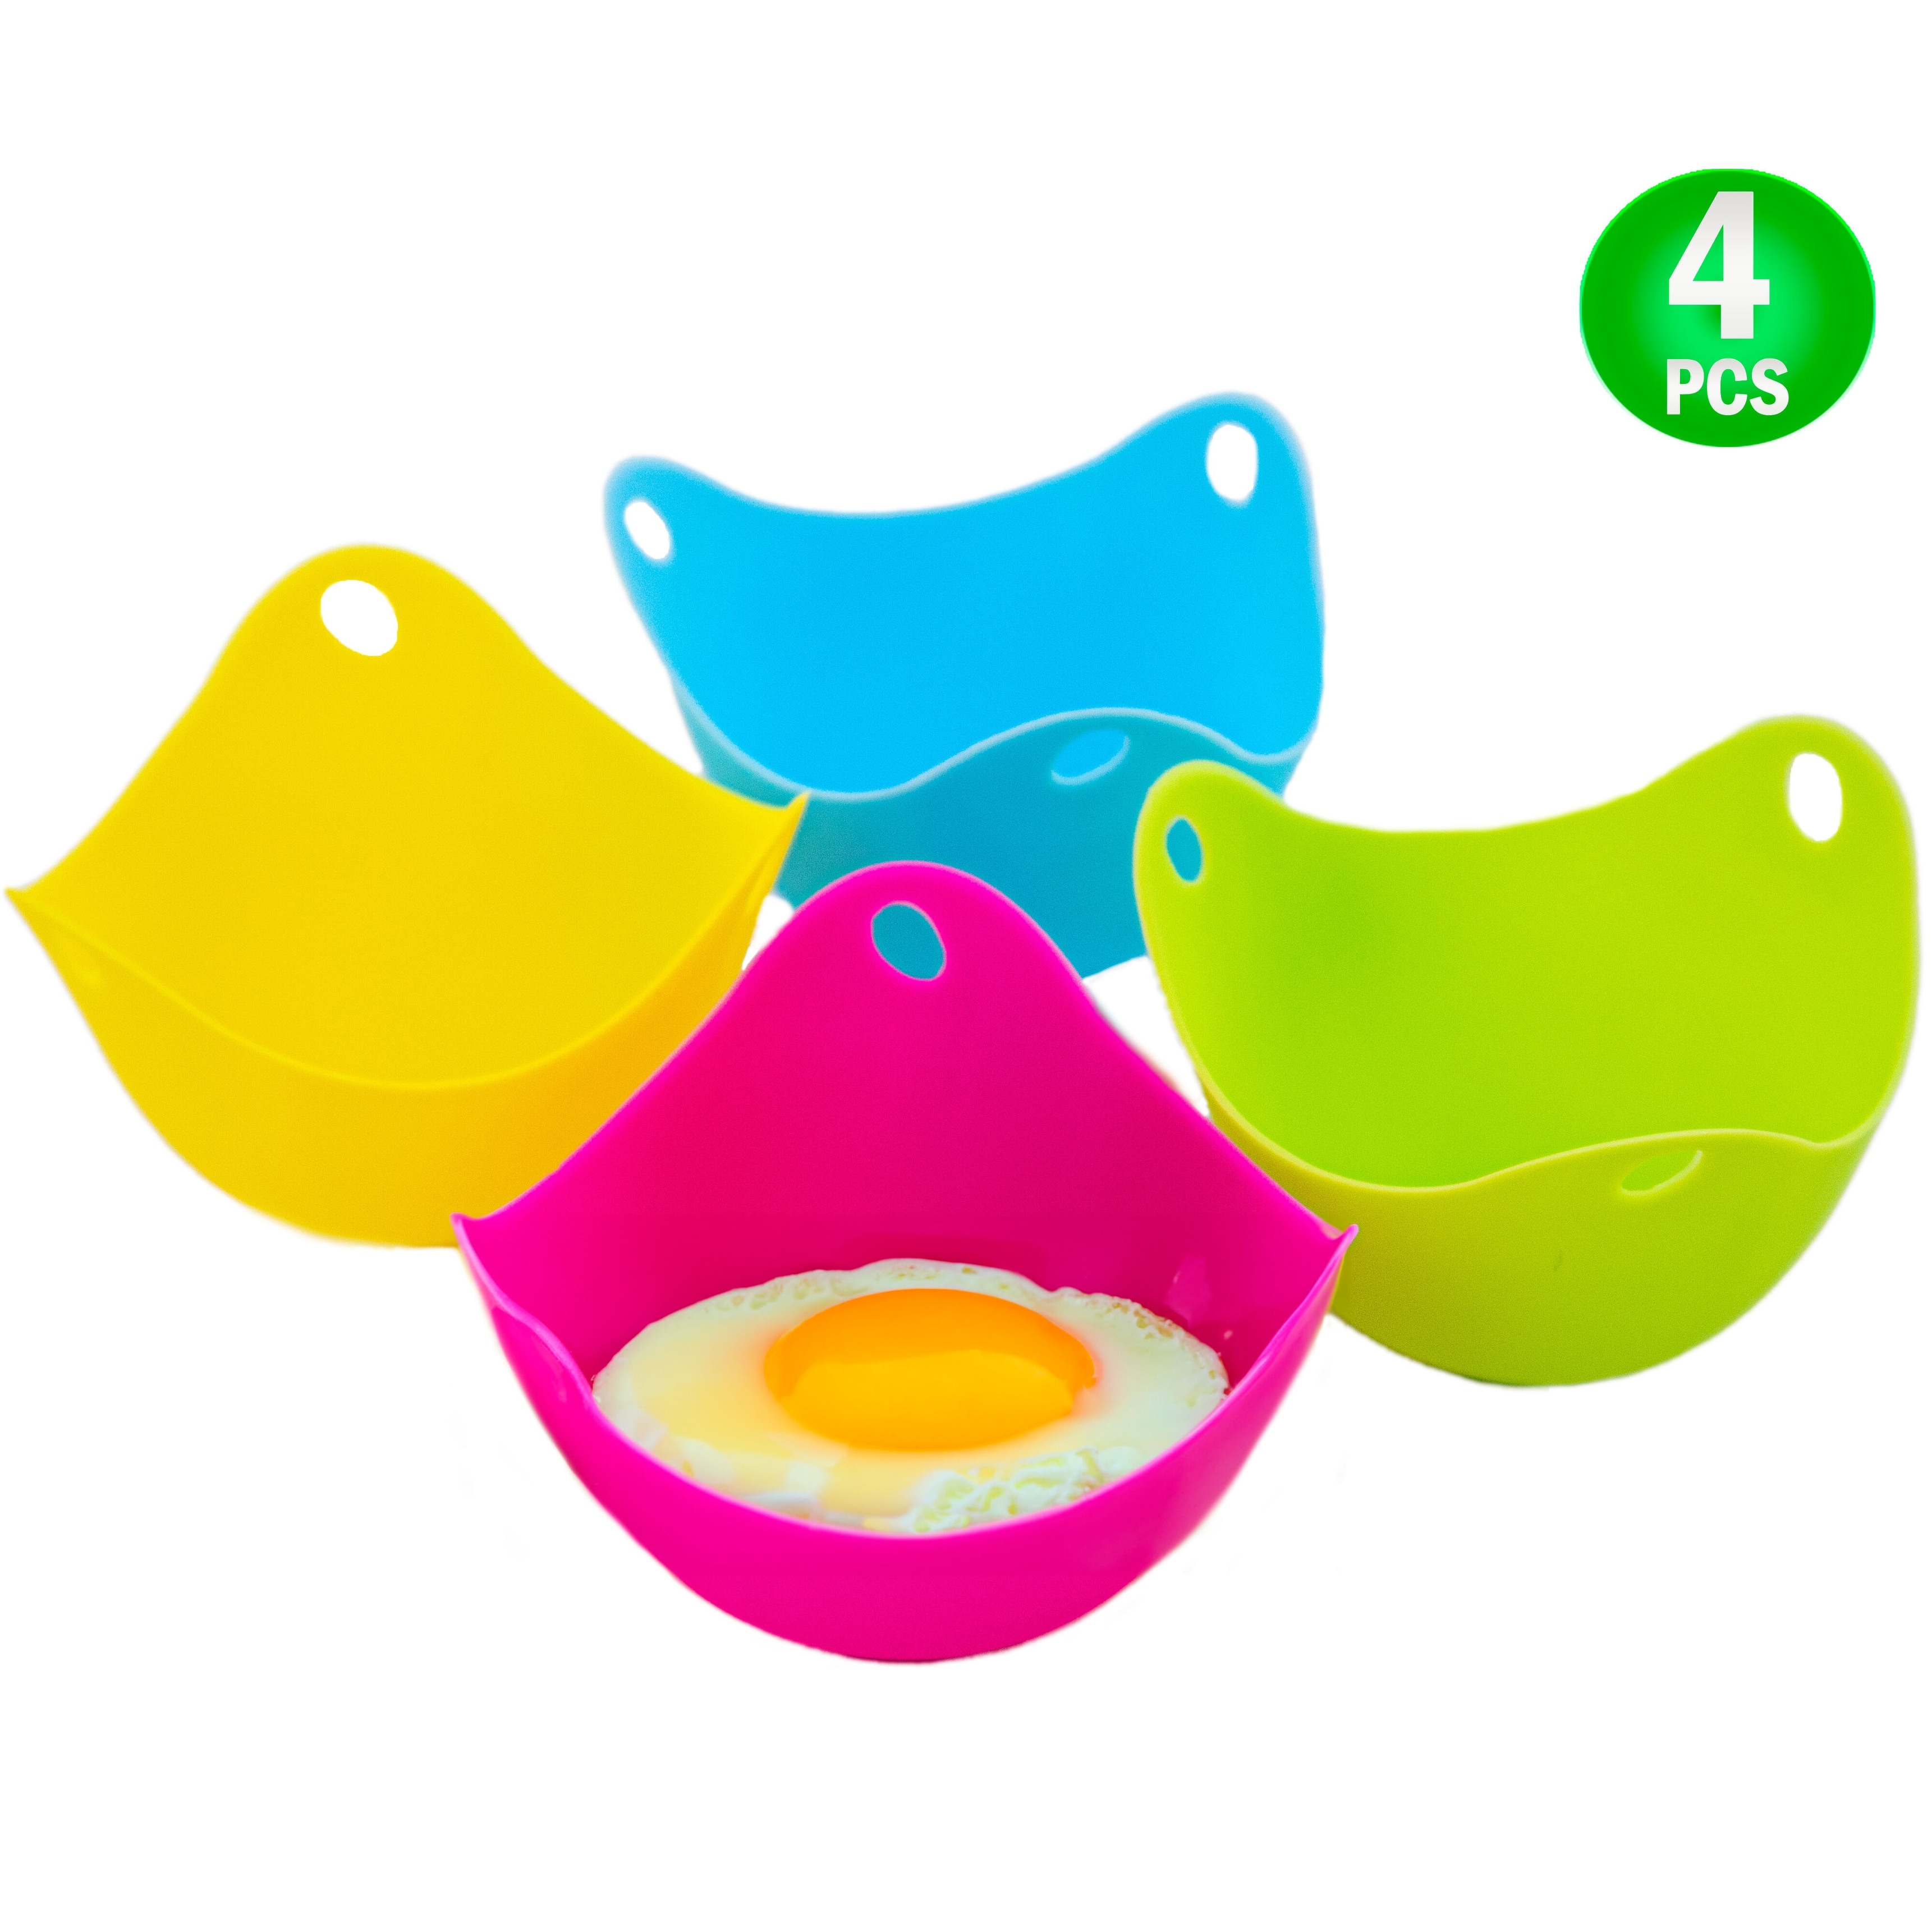 Egg Poacher - Silicone Egg Poaching Cups For Microwave or Stovetop